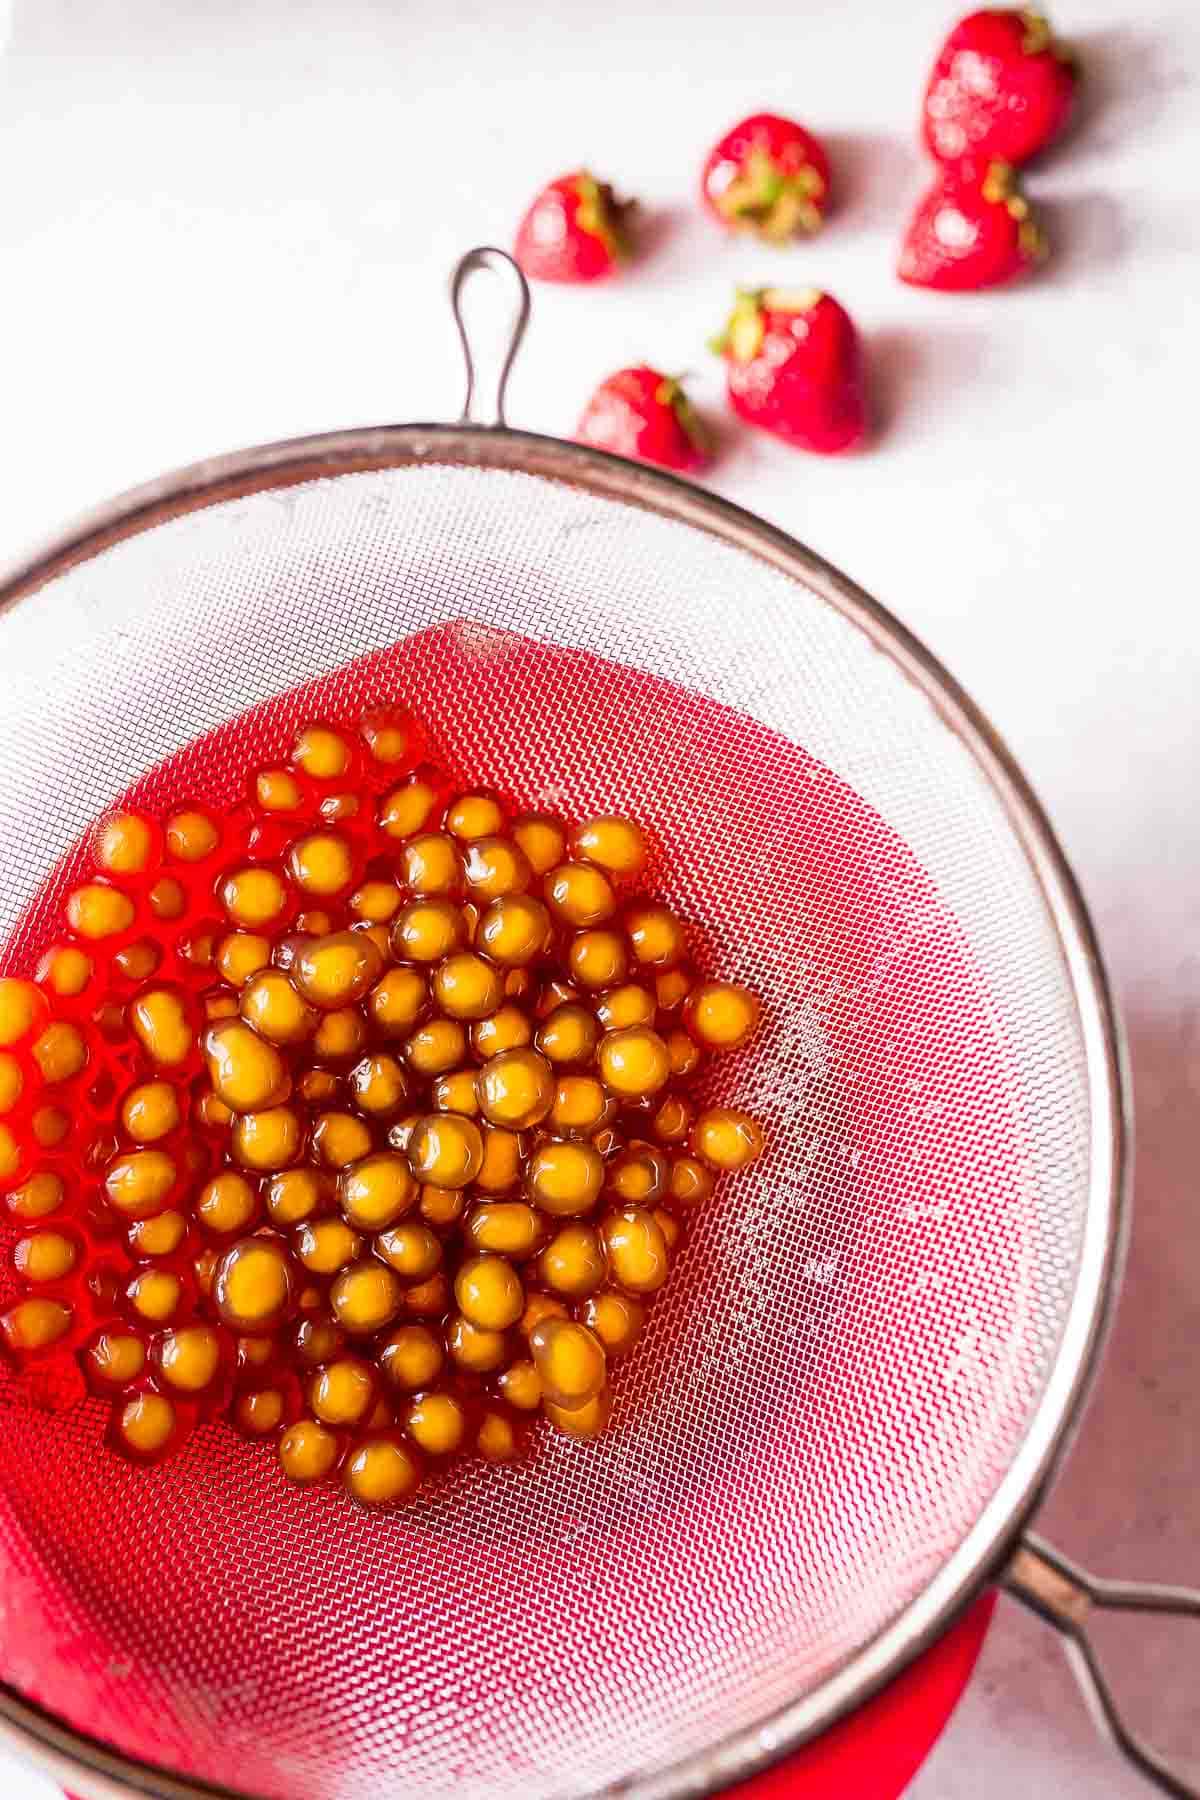 A mesh strainer filled with boba pearls rests on a bright red mixing bowl.